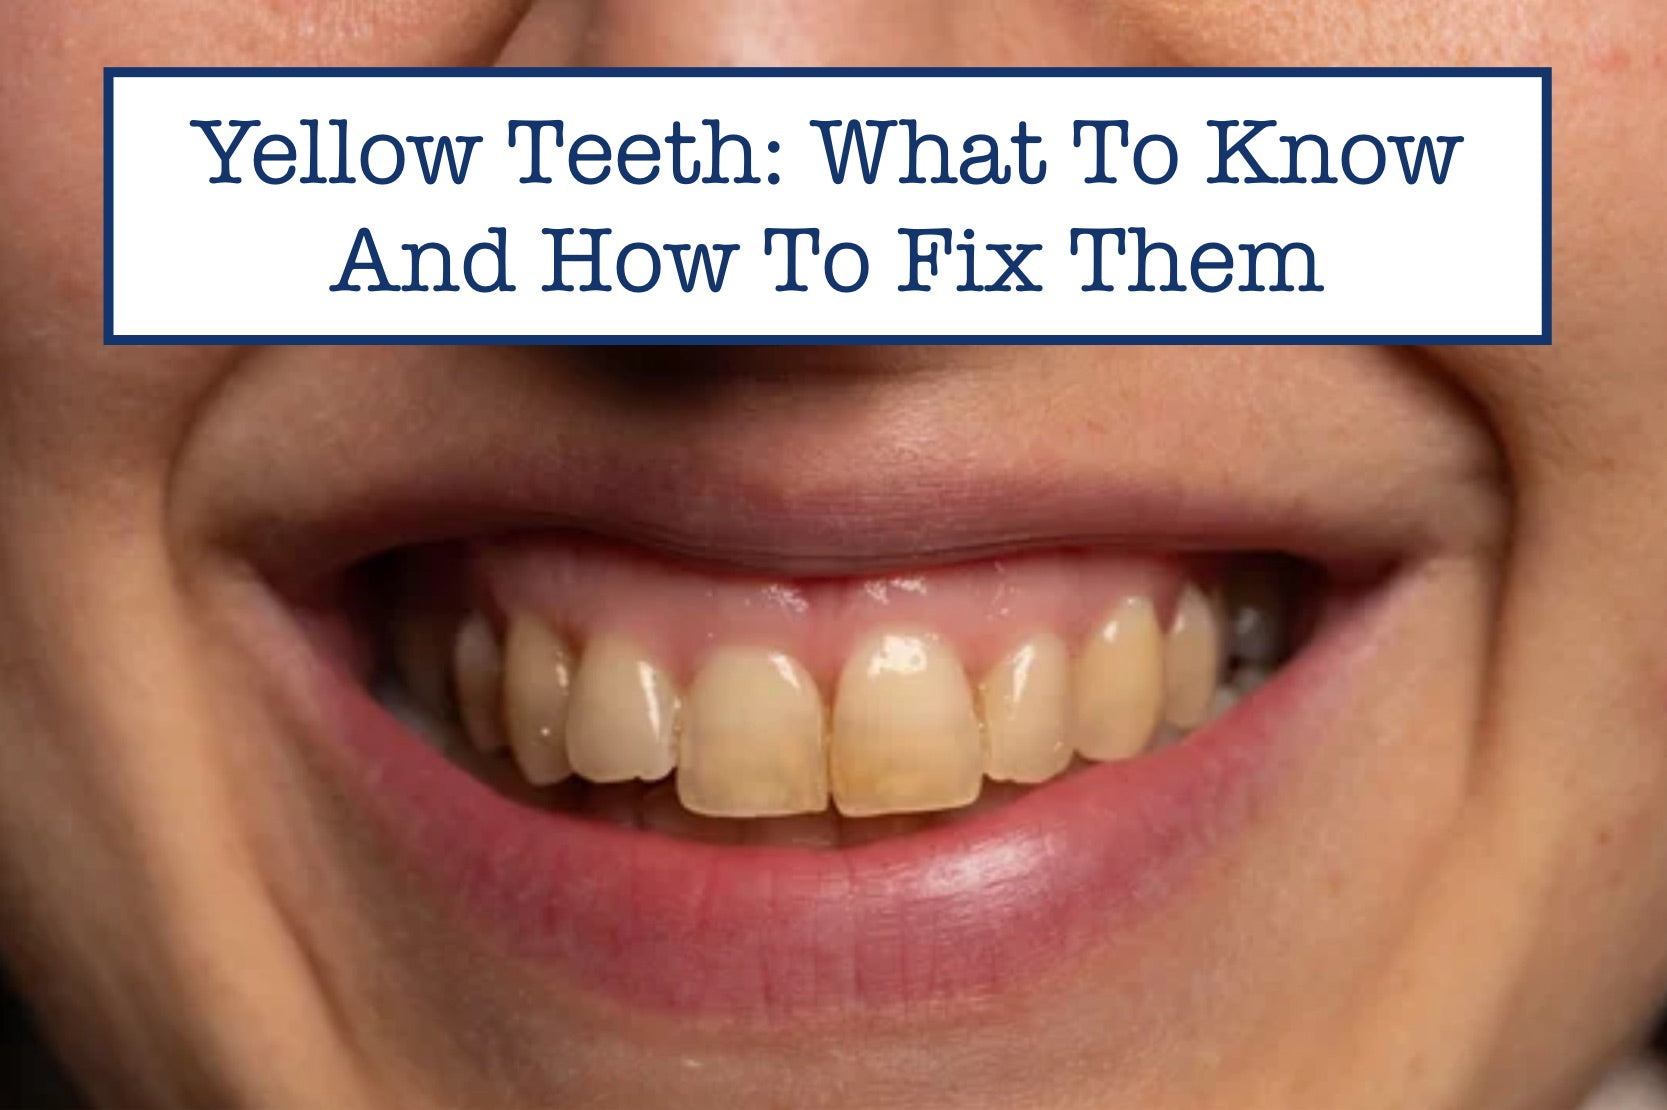 Yellow Teeth: What To Know And How To Fix Them